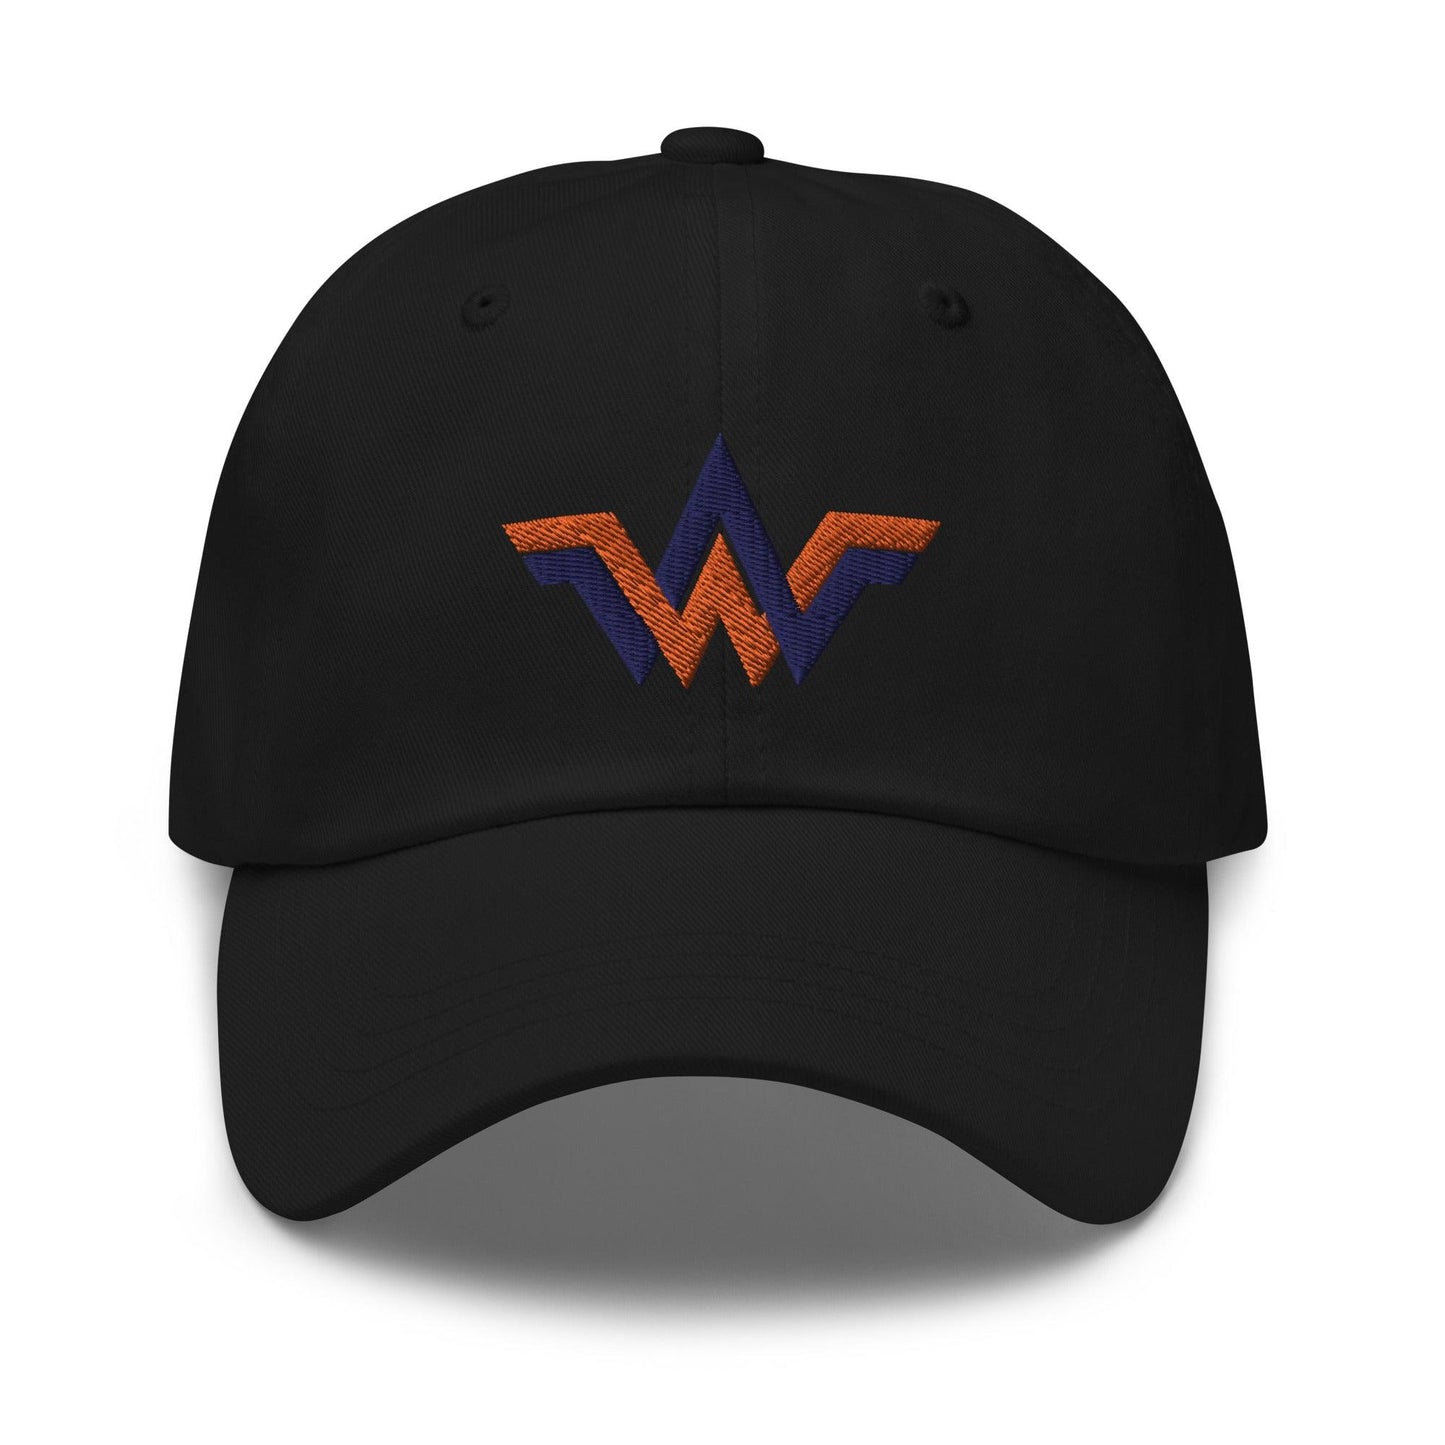 Will Wagner "Signature" hat - Fan Arch